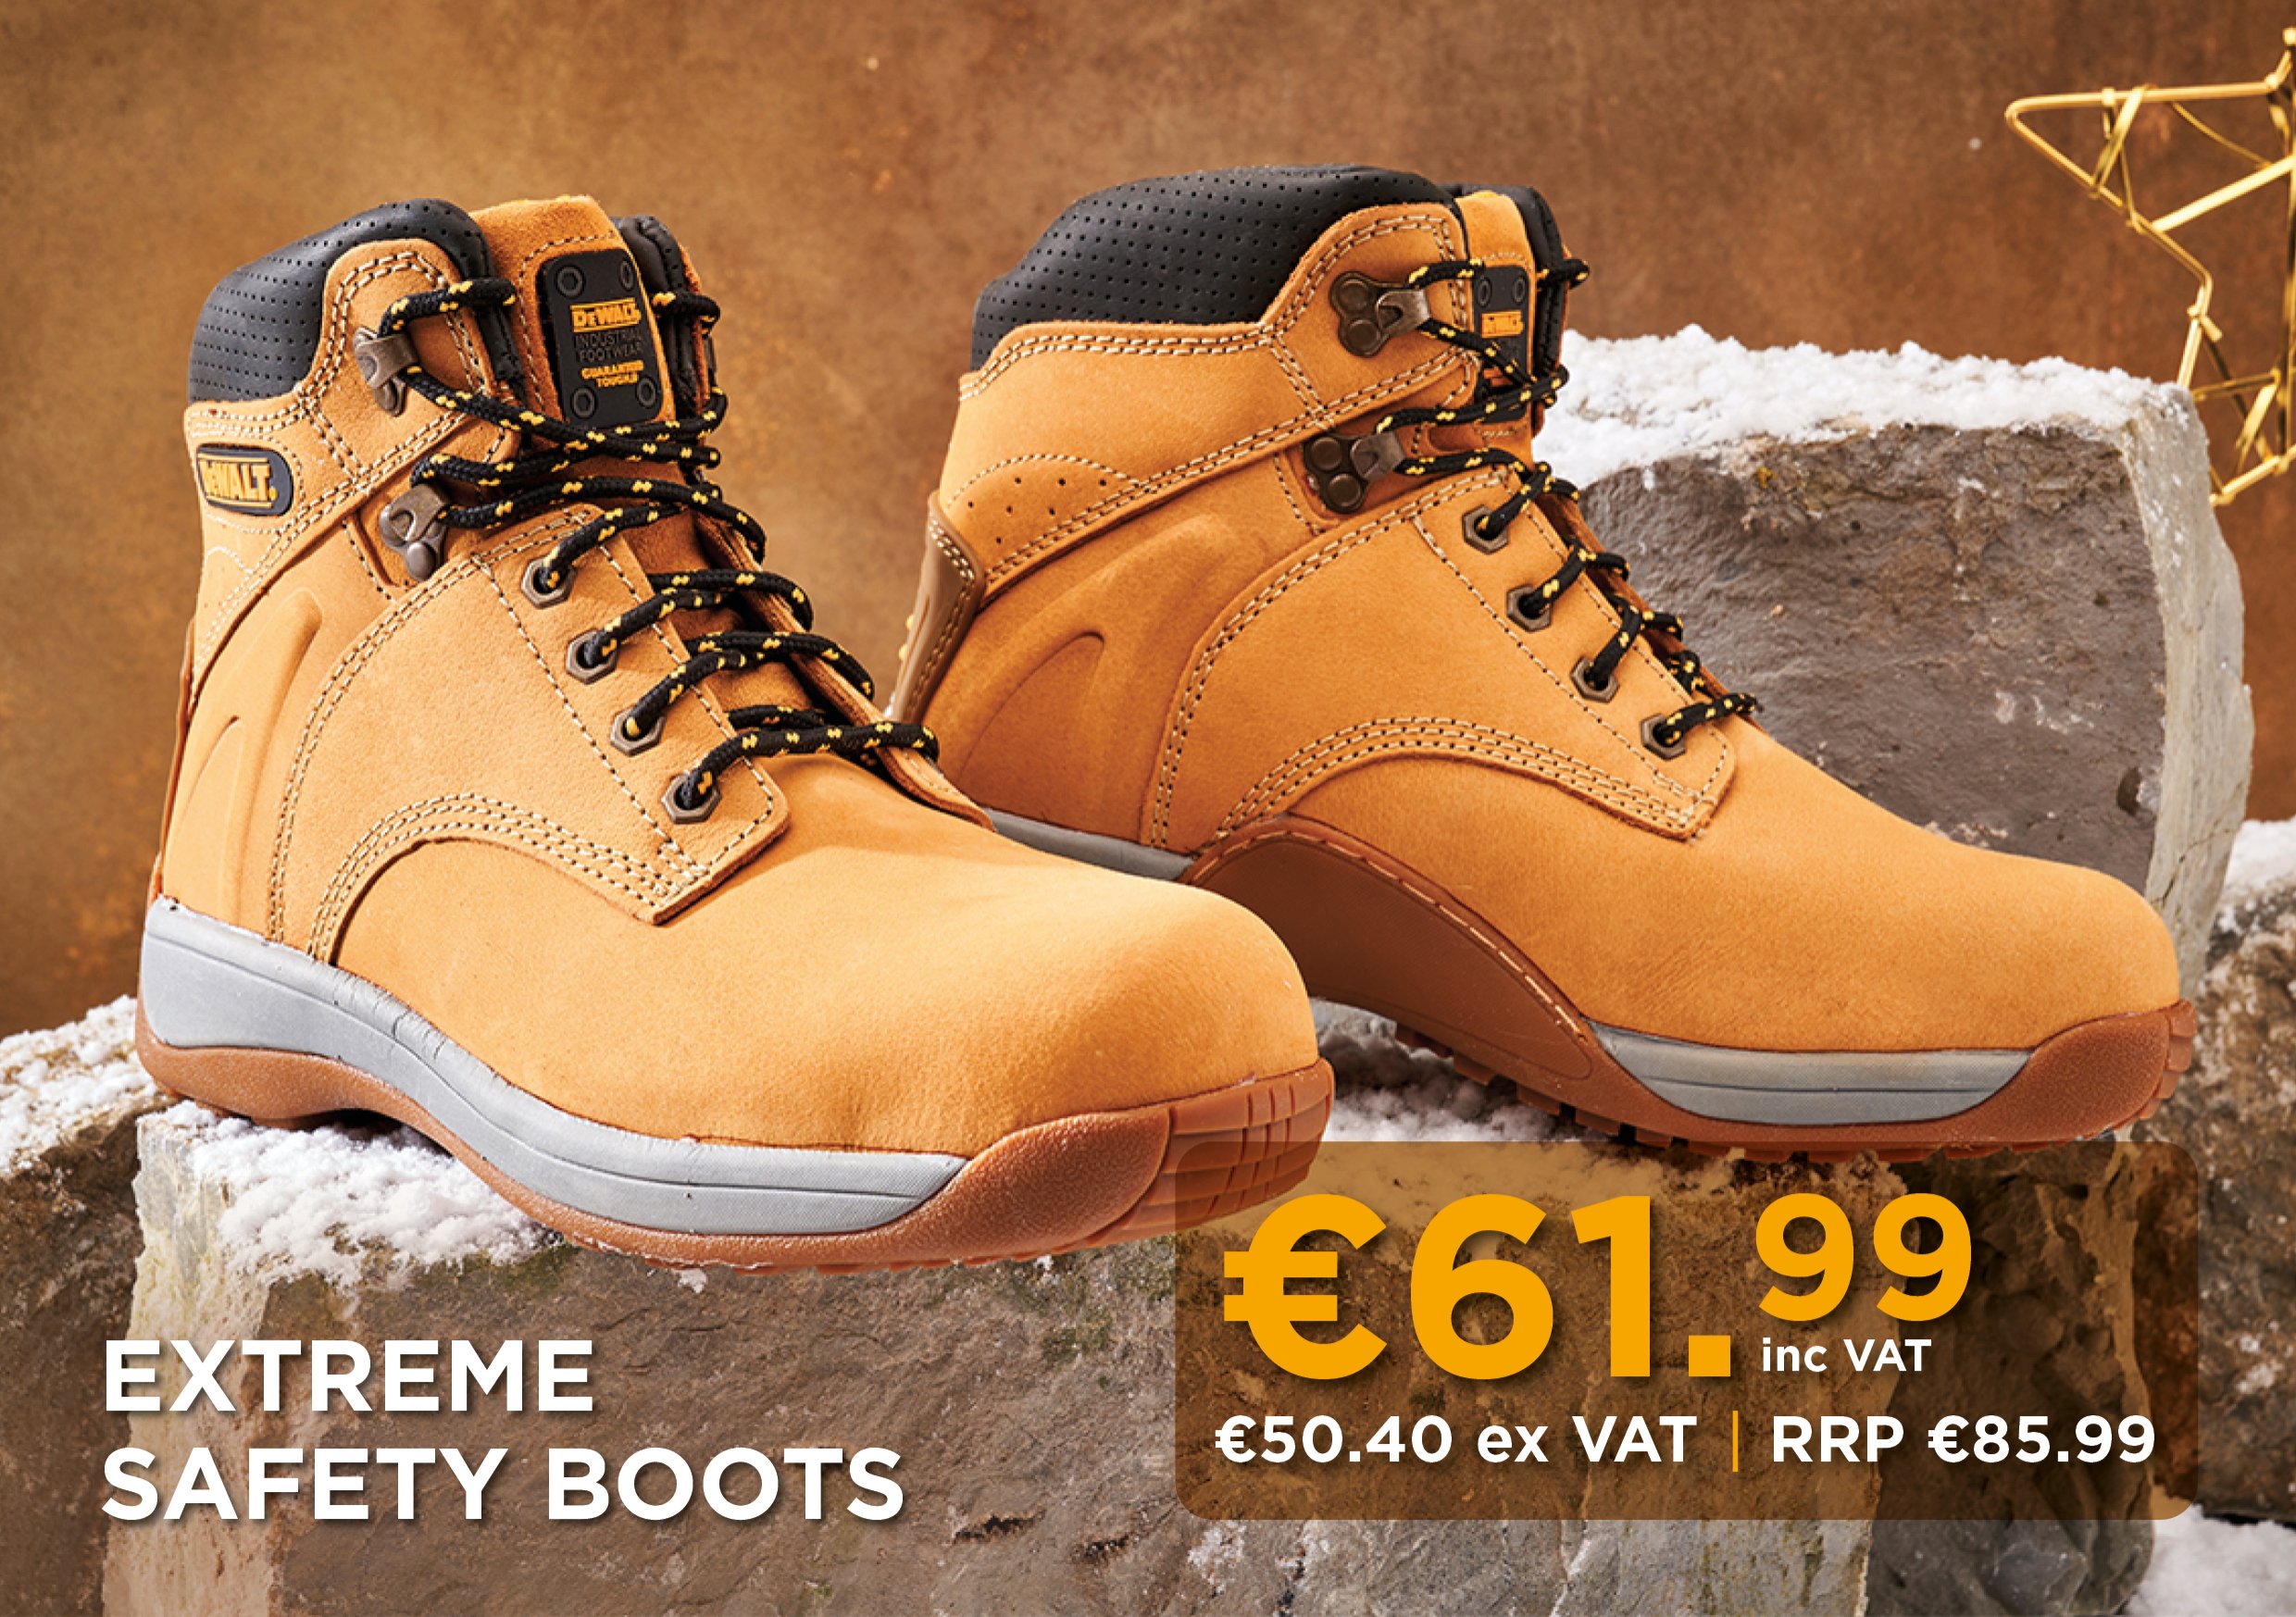 Extreme Safety Boots